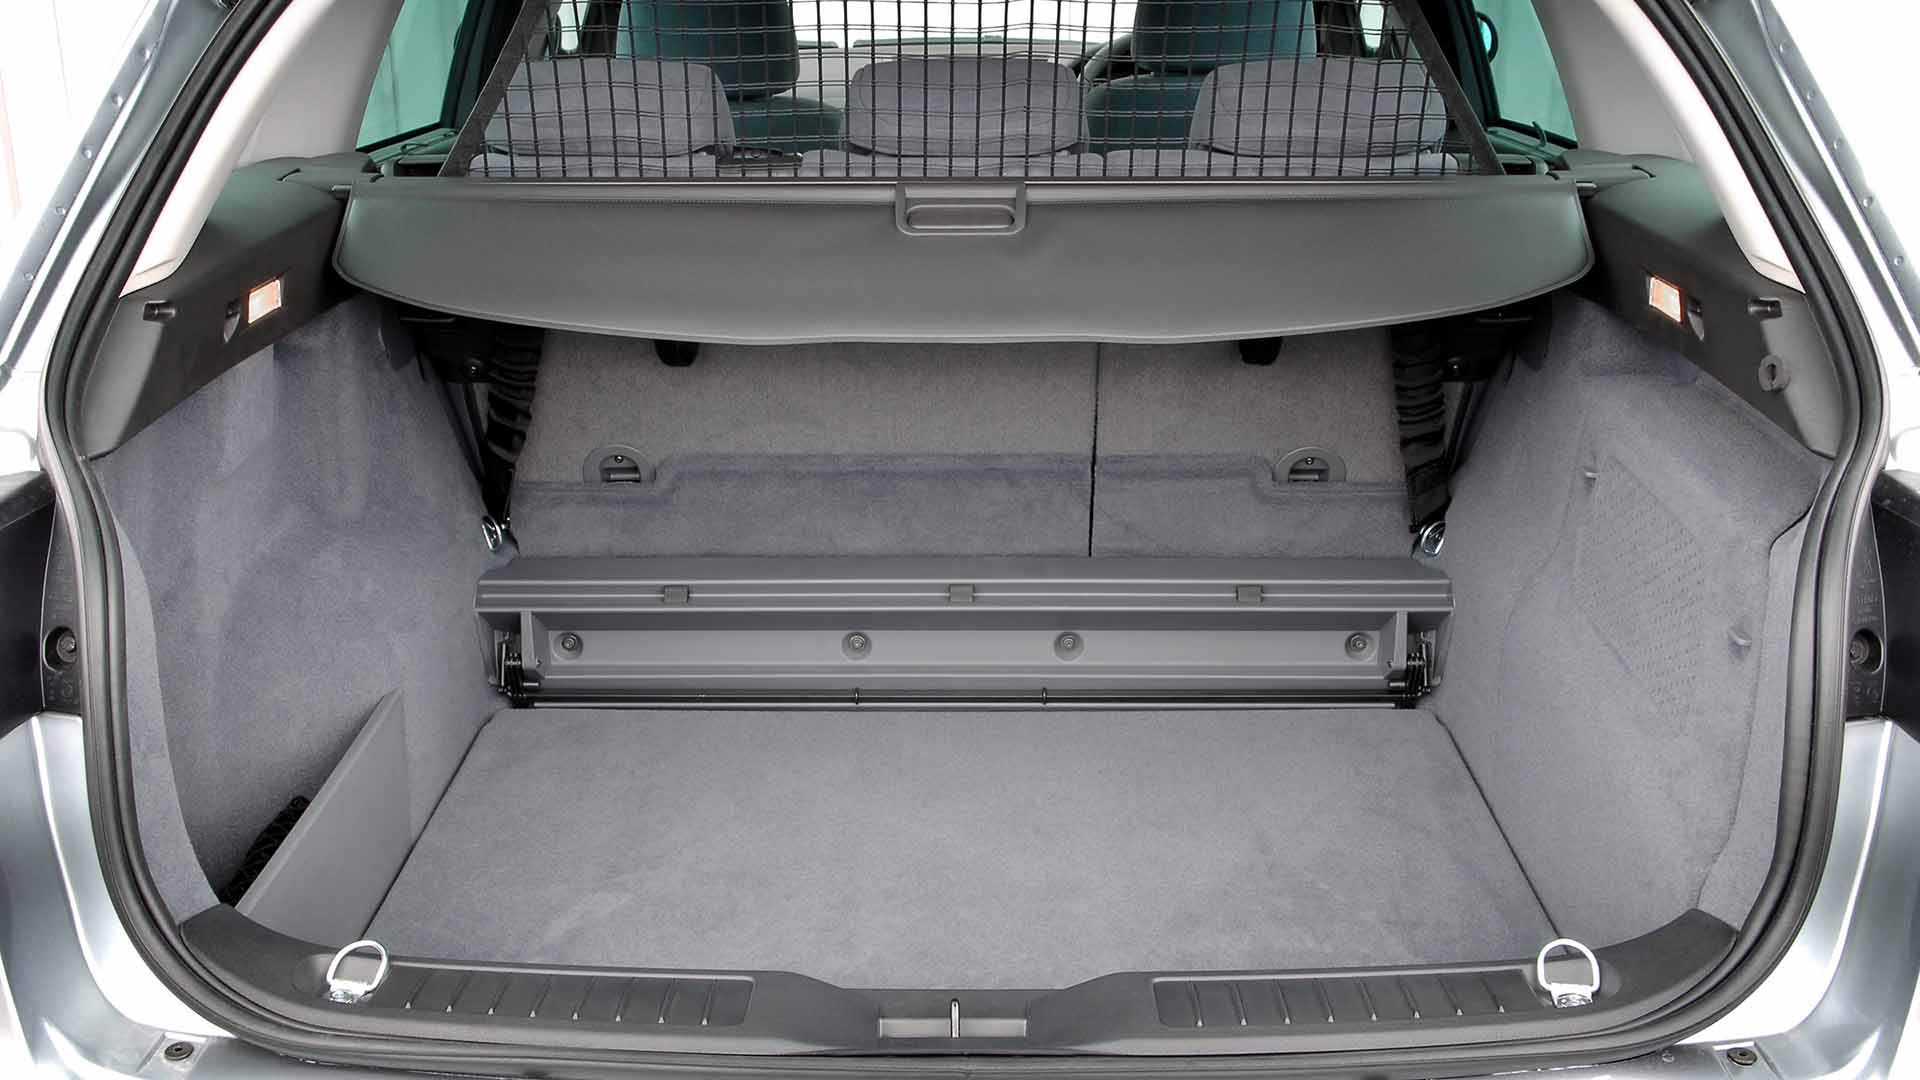 Fiat Croma boot space